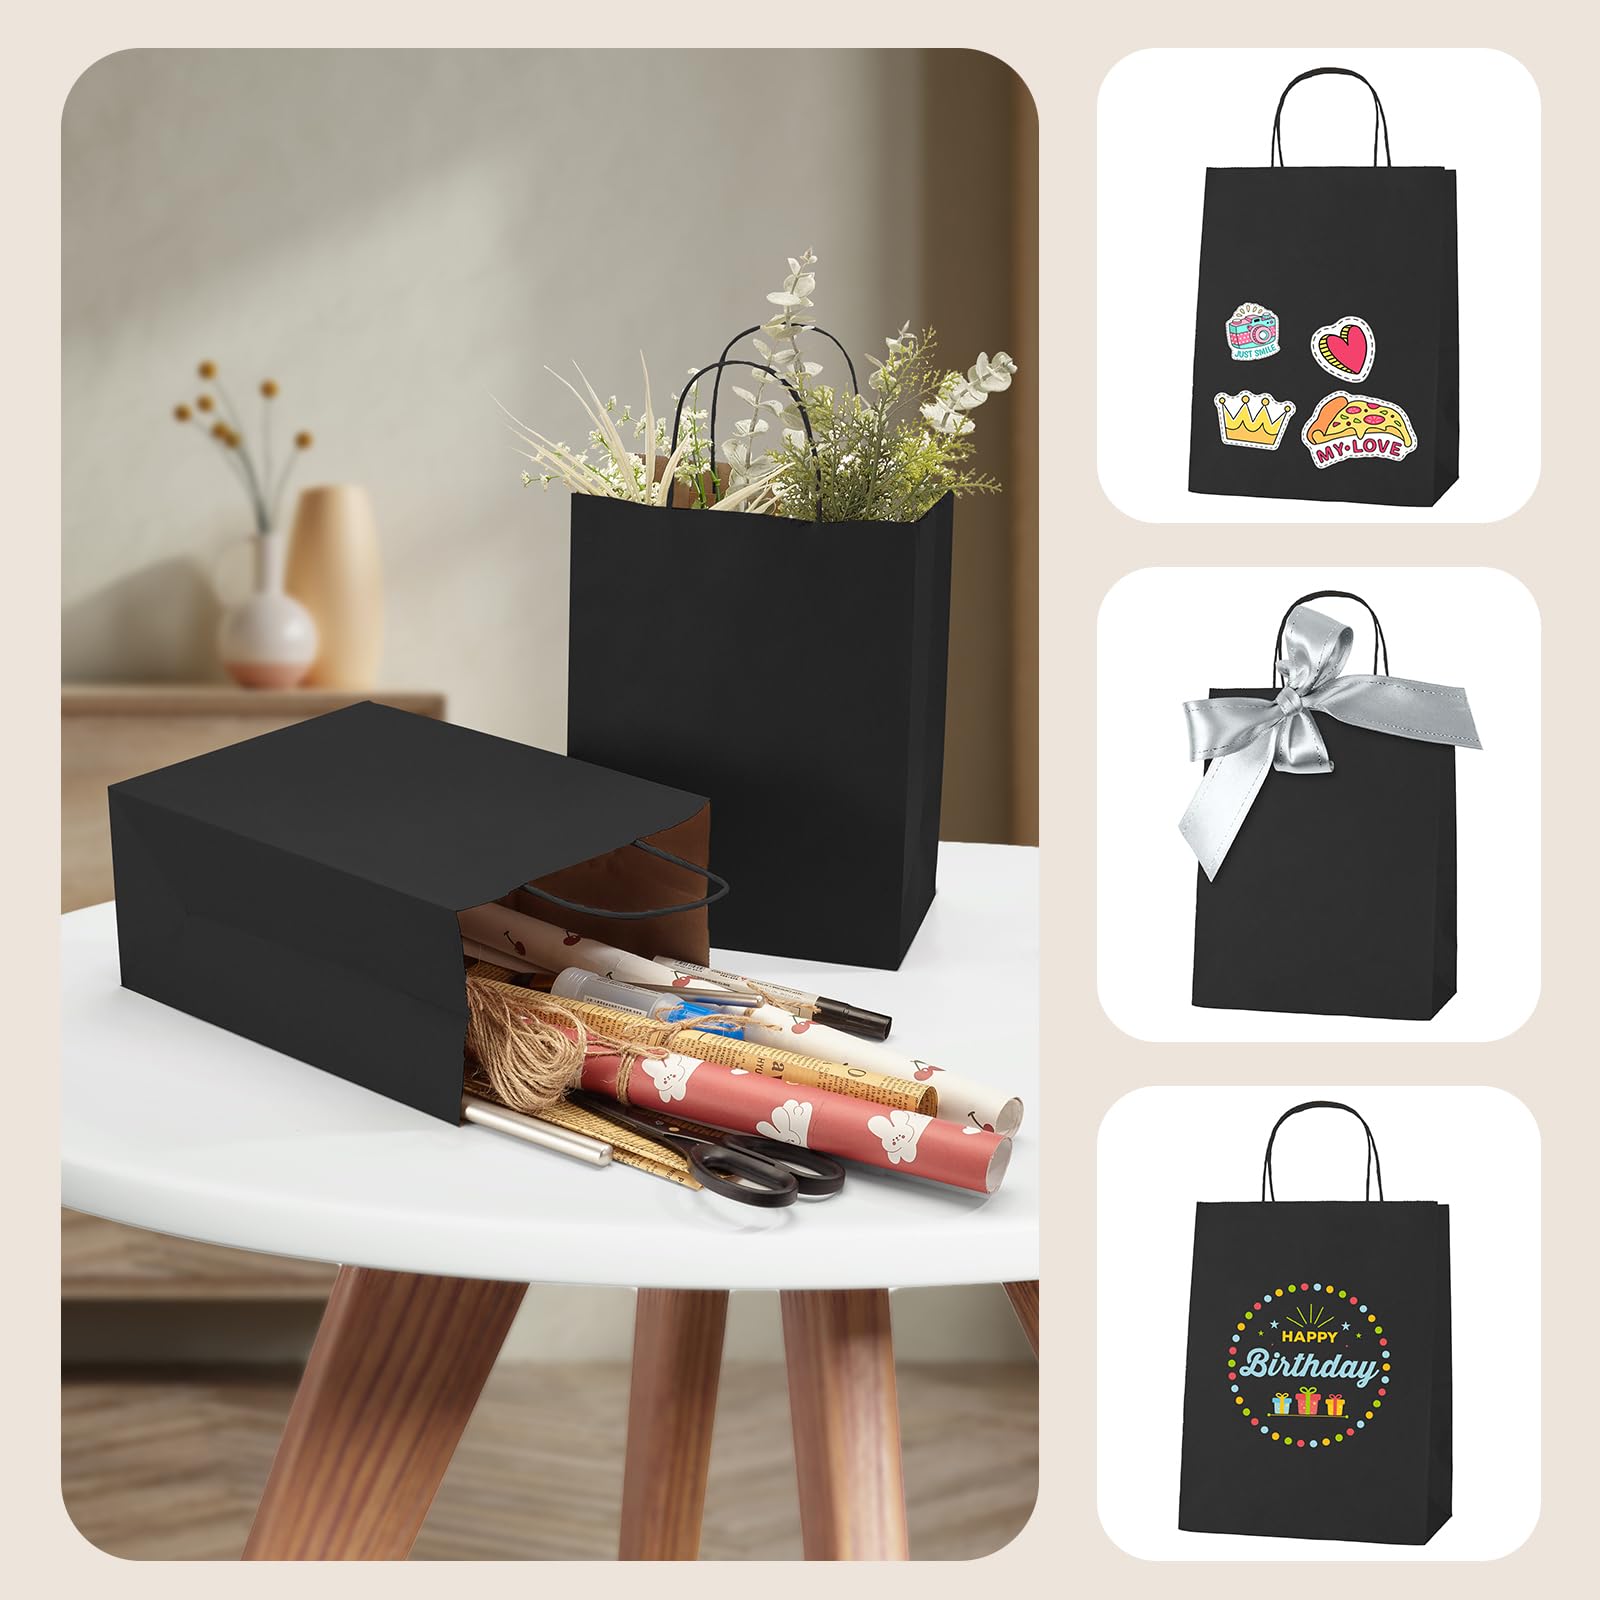 MESHA Black Gift Bags 5.25x3.75x8 Inches 100Pcs & 8x4.75x10.5 Inches 50Pcs Kraft Paper Bags with Handles Small Shopping Bags,Wedding Party Favor Bags